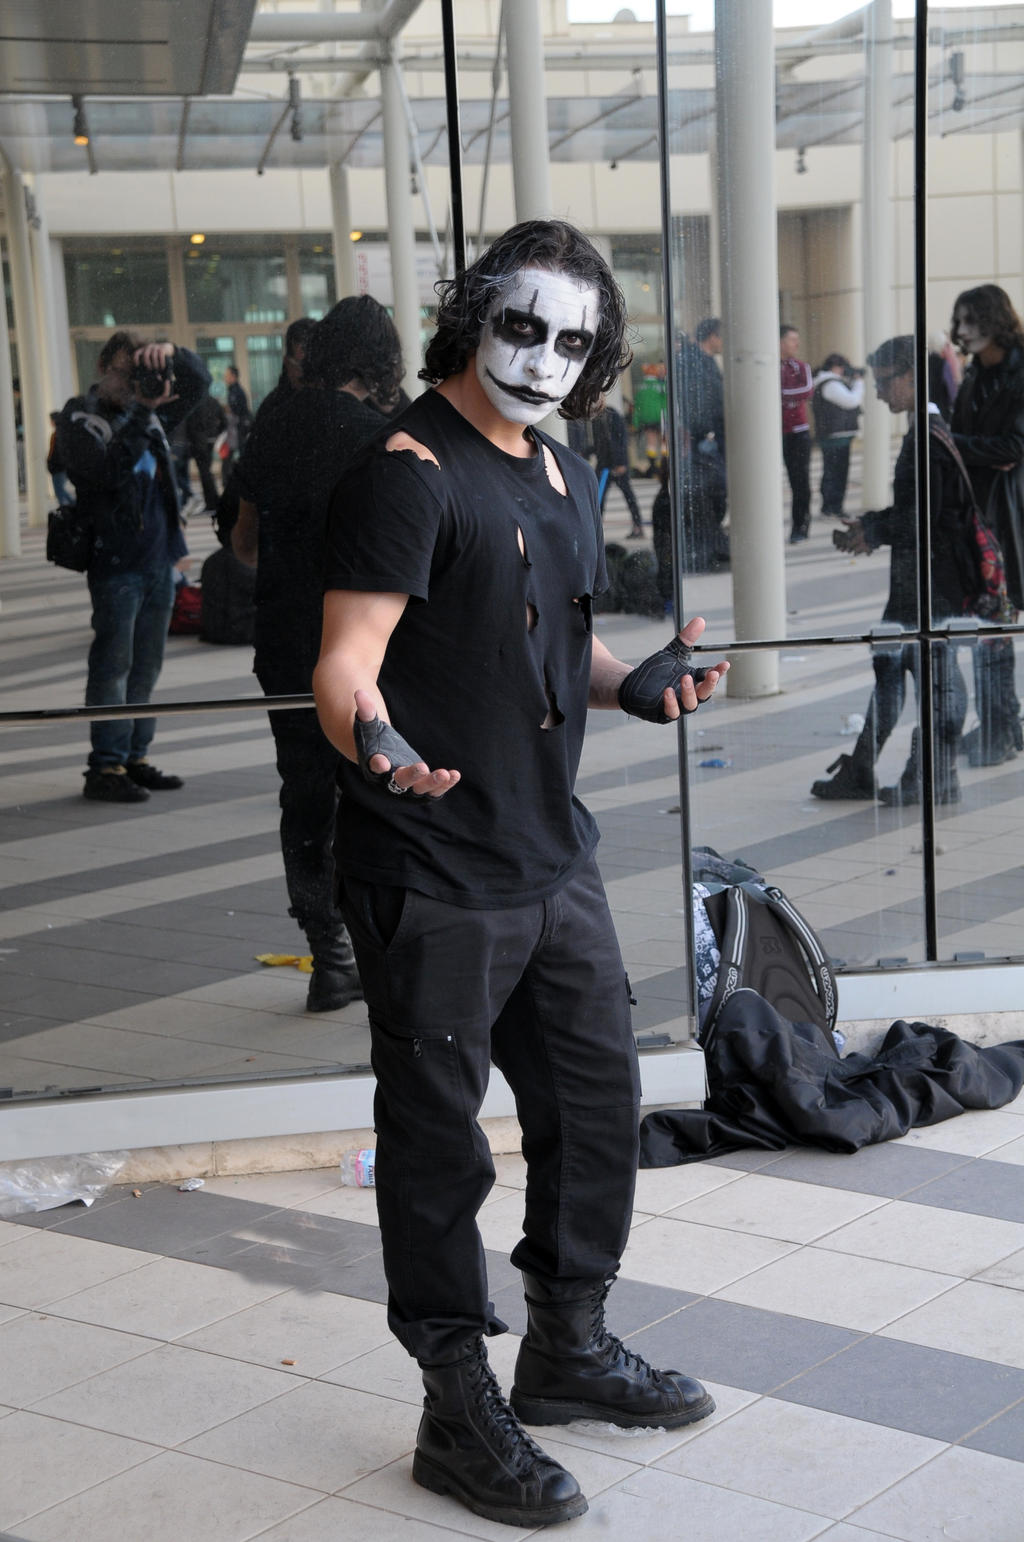 The Crow Cosplay by Maspez on DeviantArt